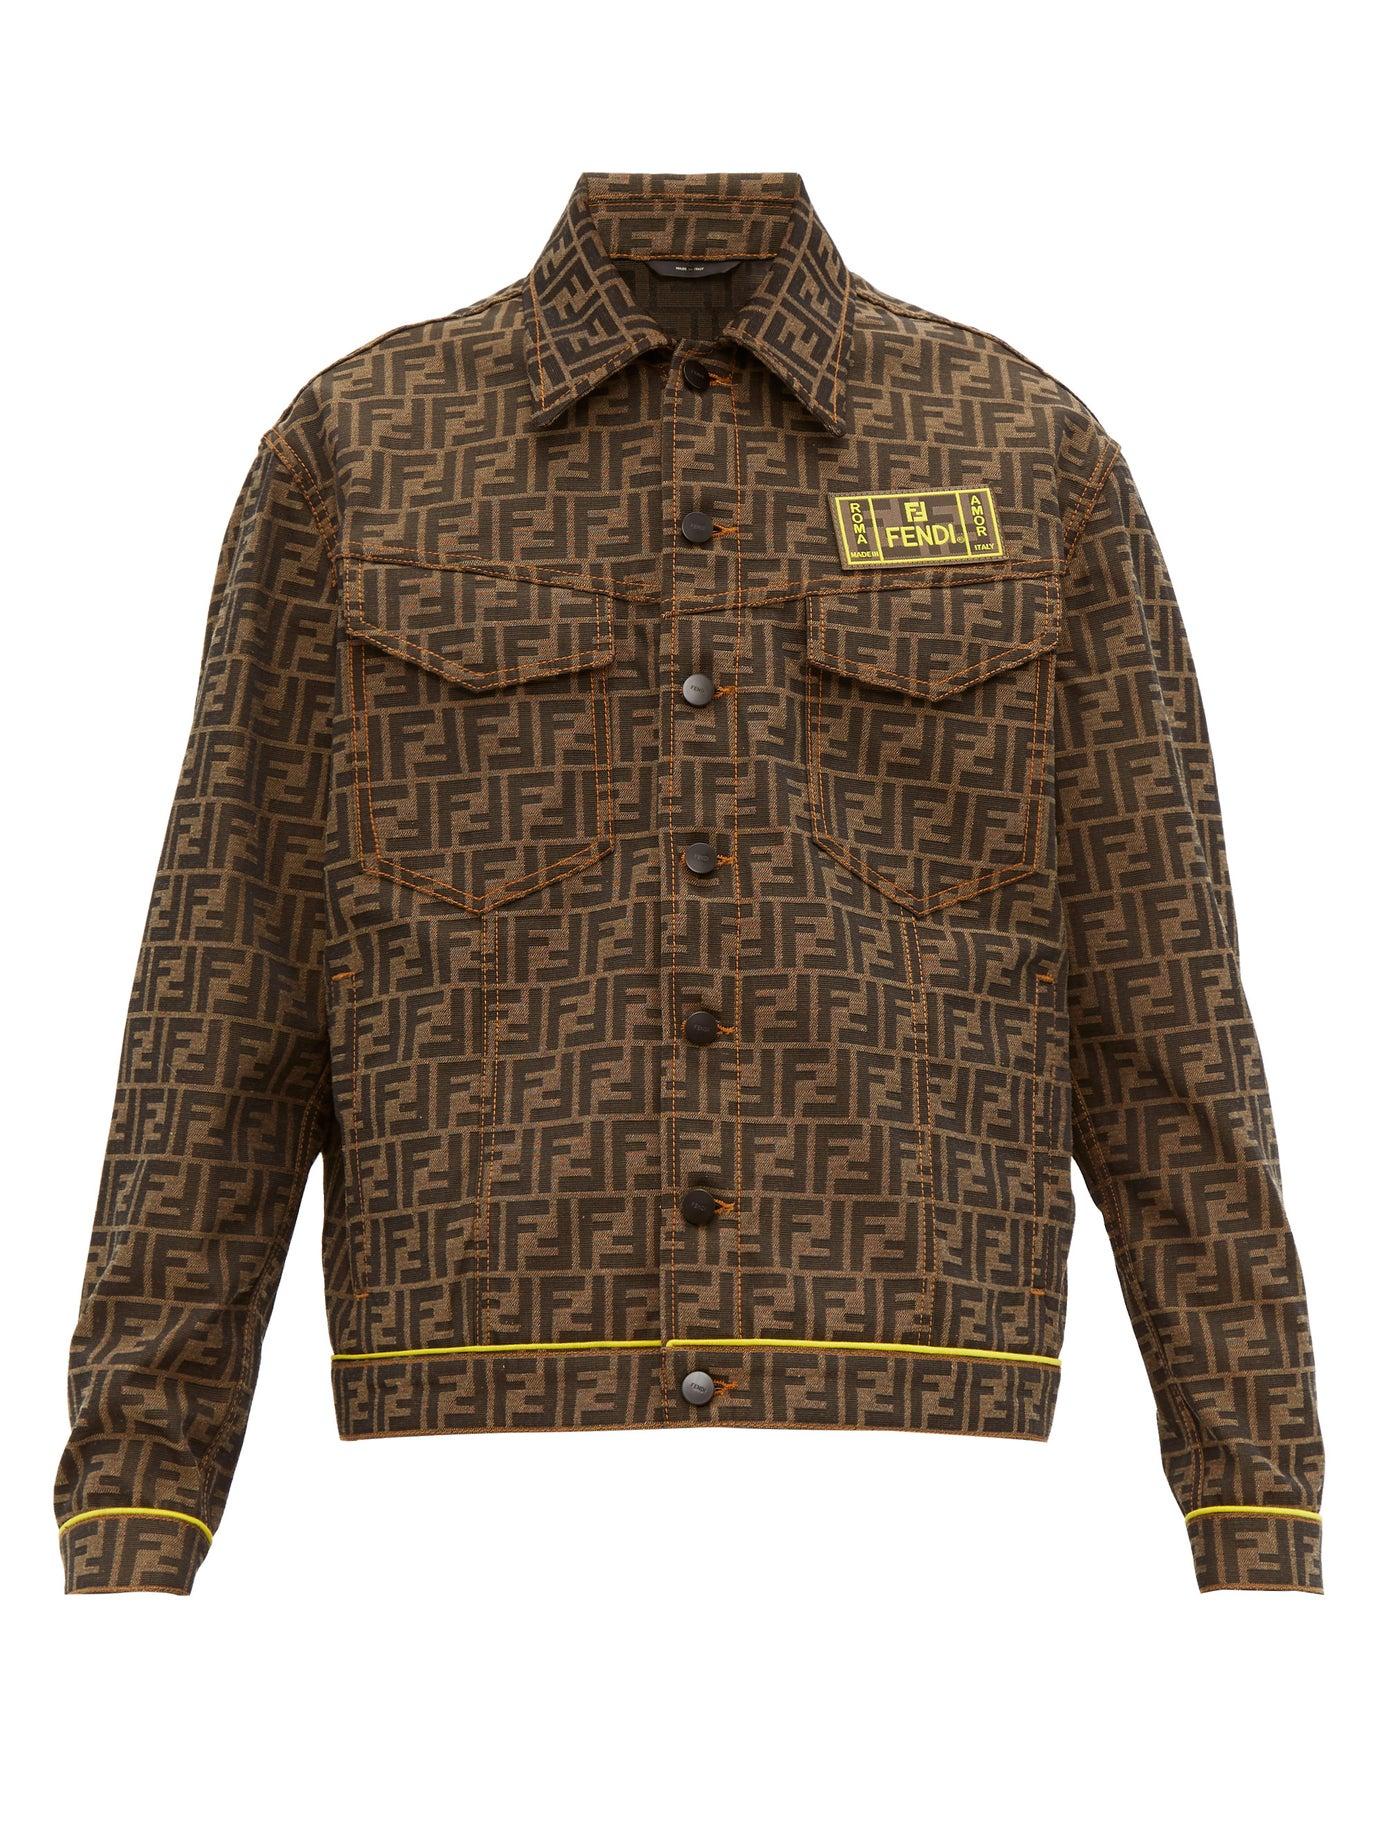 Fendi Logo Patch Ff Jacquard Canvas Jacket in Brown for Men - Lyst